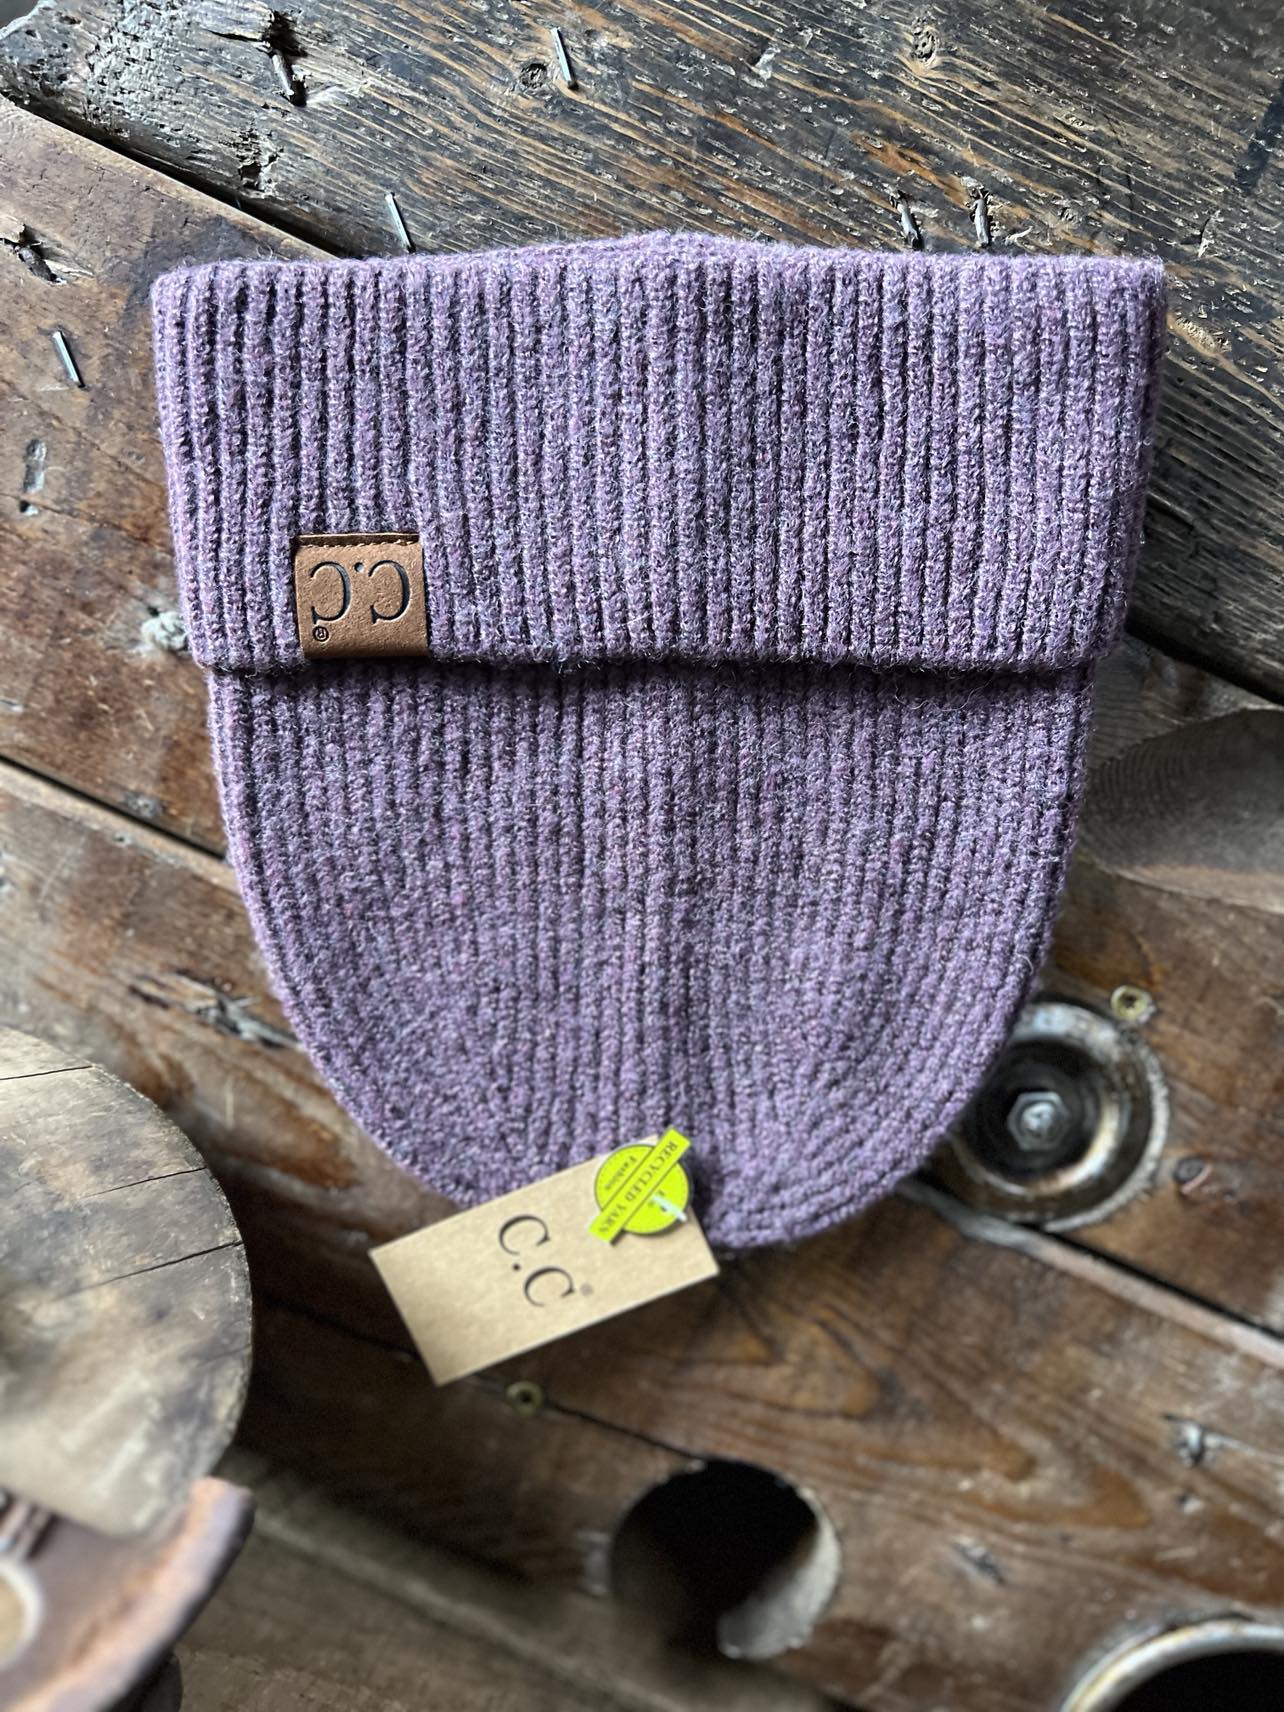 C.C Soft Ribbed Cuff Beanies-Beanie/Gloves-C.C Beanies-Lucky J Boots & More, Women's, Men's, & Kids Western Store Located in Carthage, MO